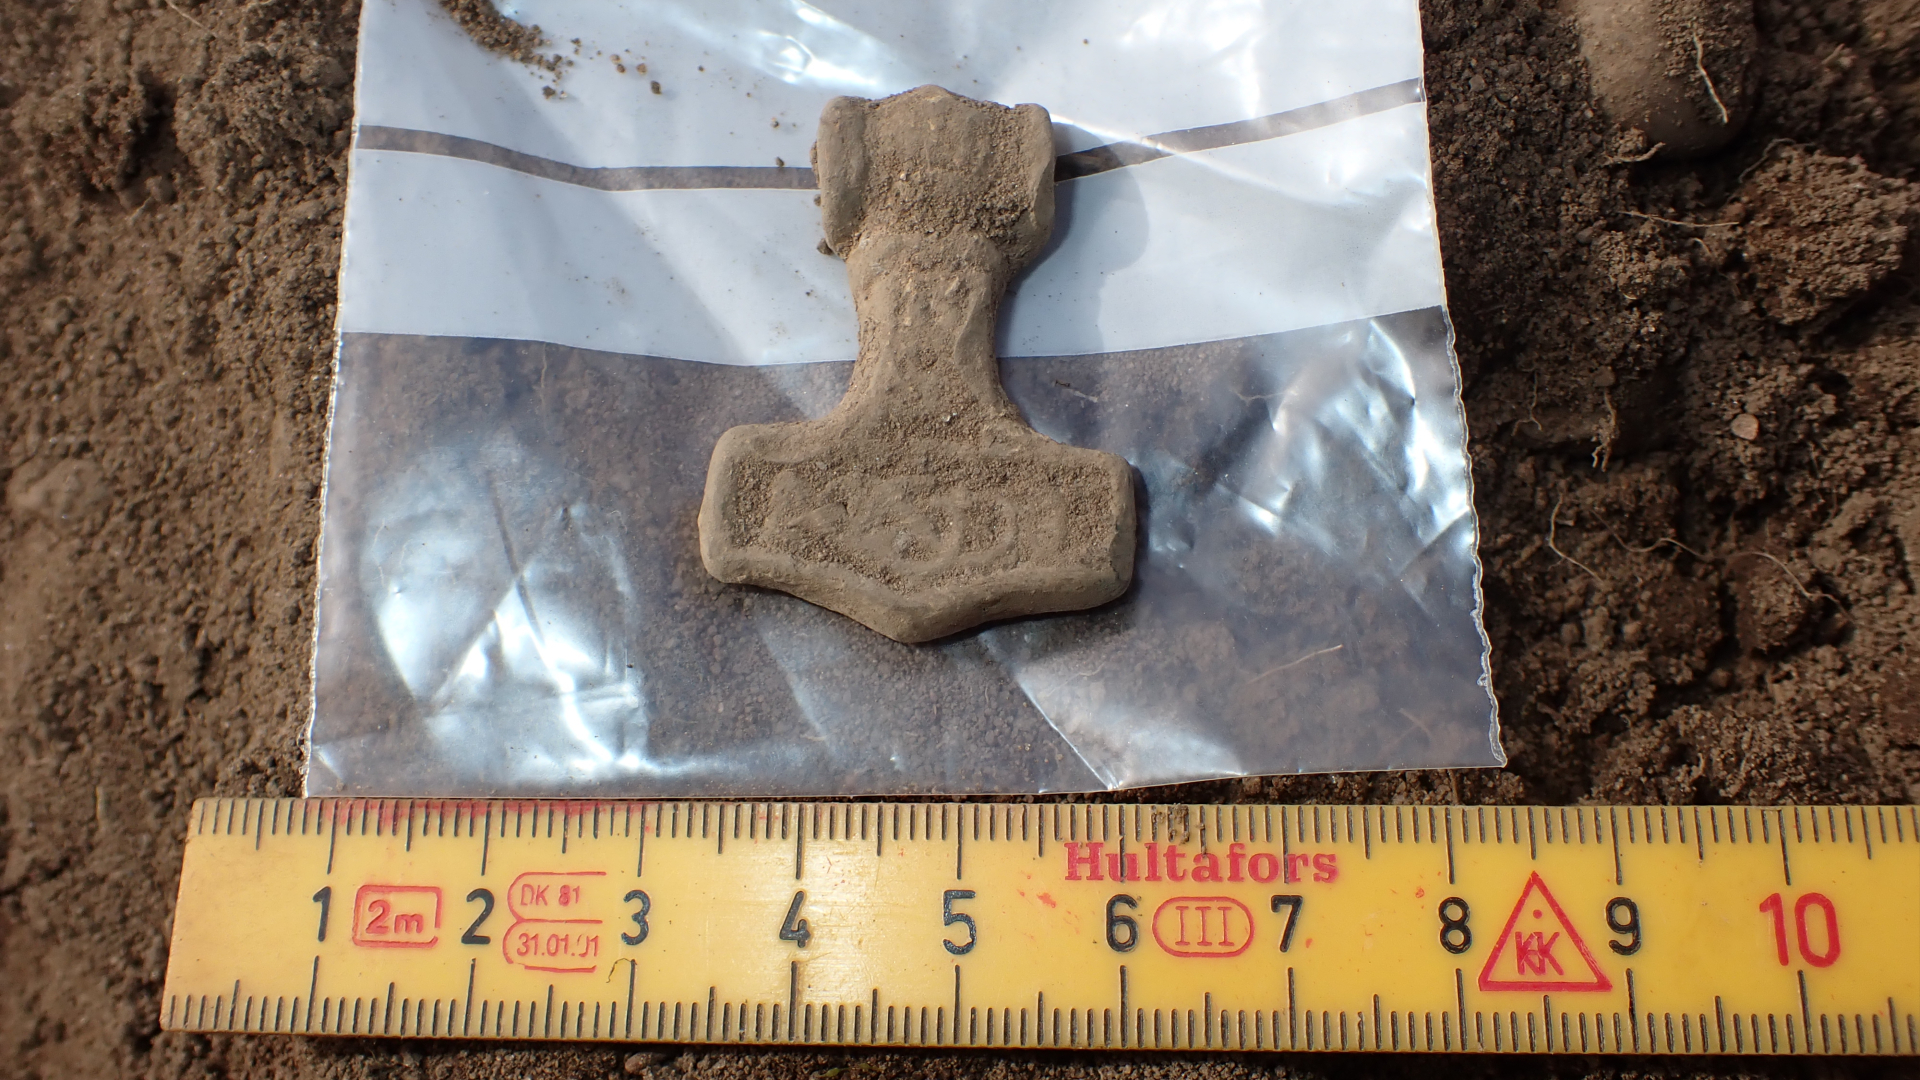 Thor's Hammer amulet from Viking Age unearthed in Sweden